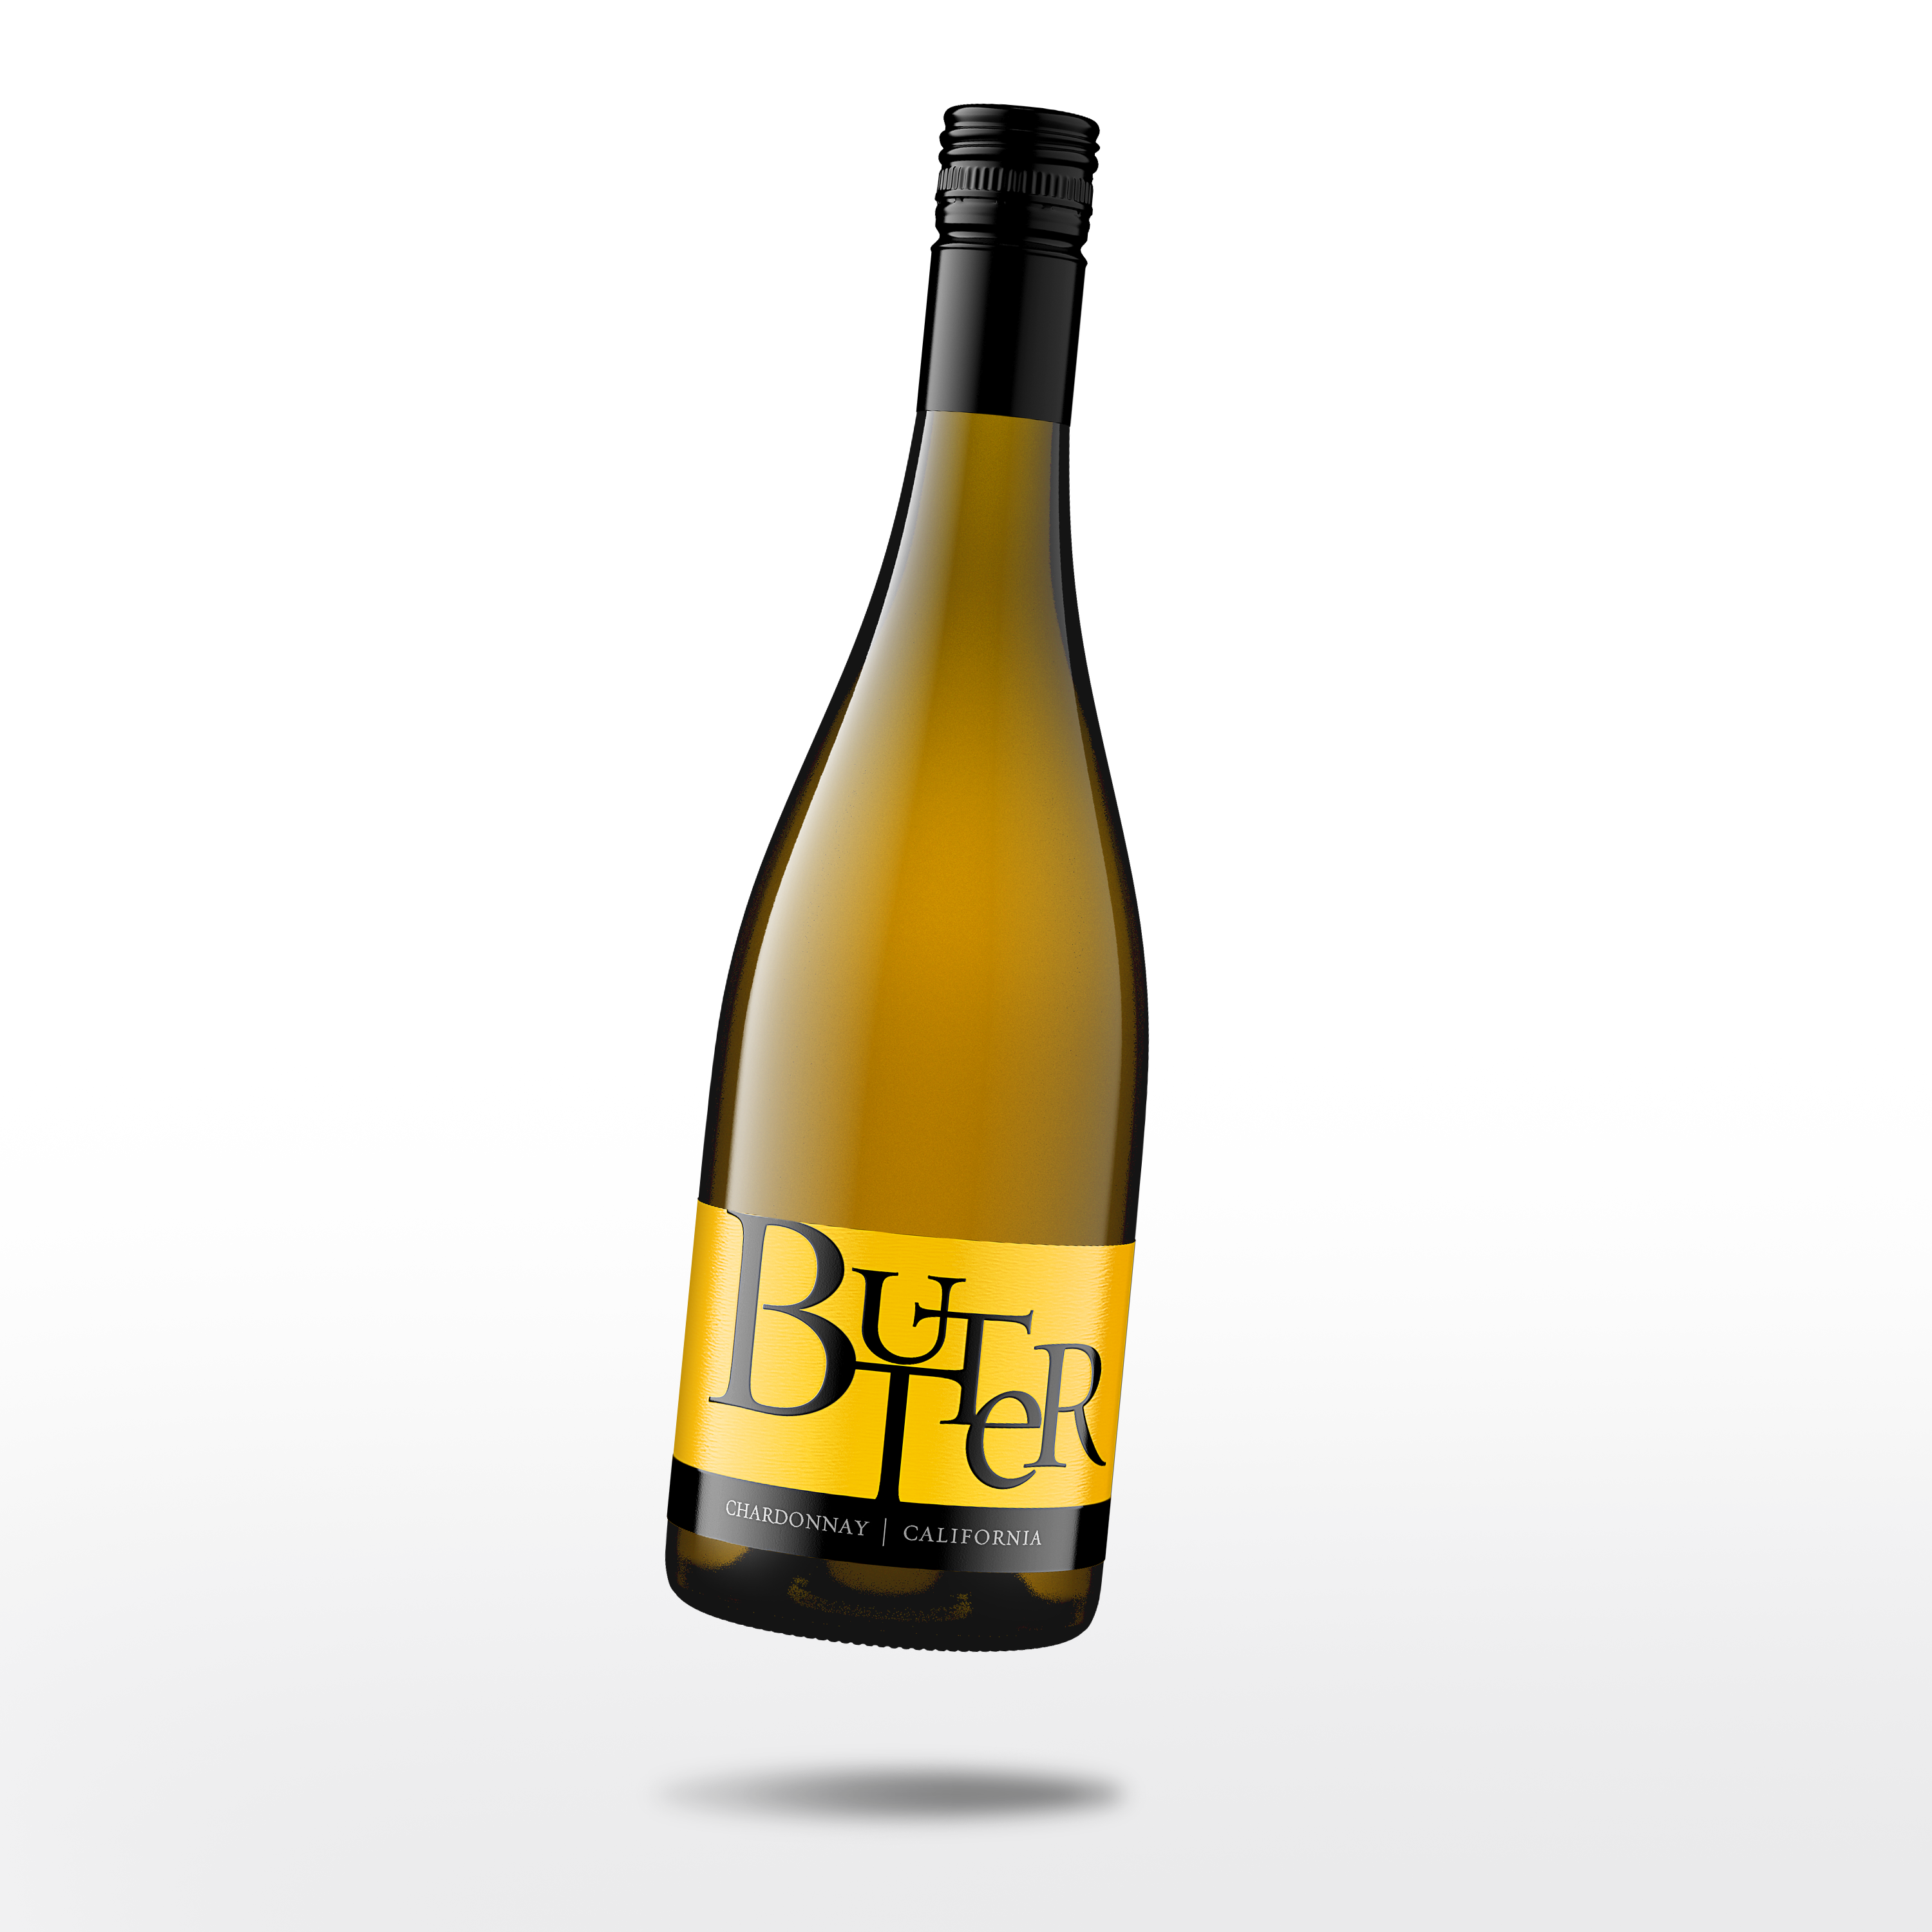 Butter Chardonnay was name Impact Hot Brand award winner for the 4th year in a row